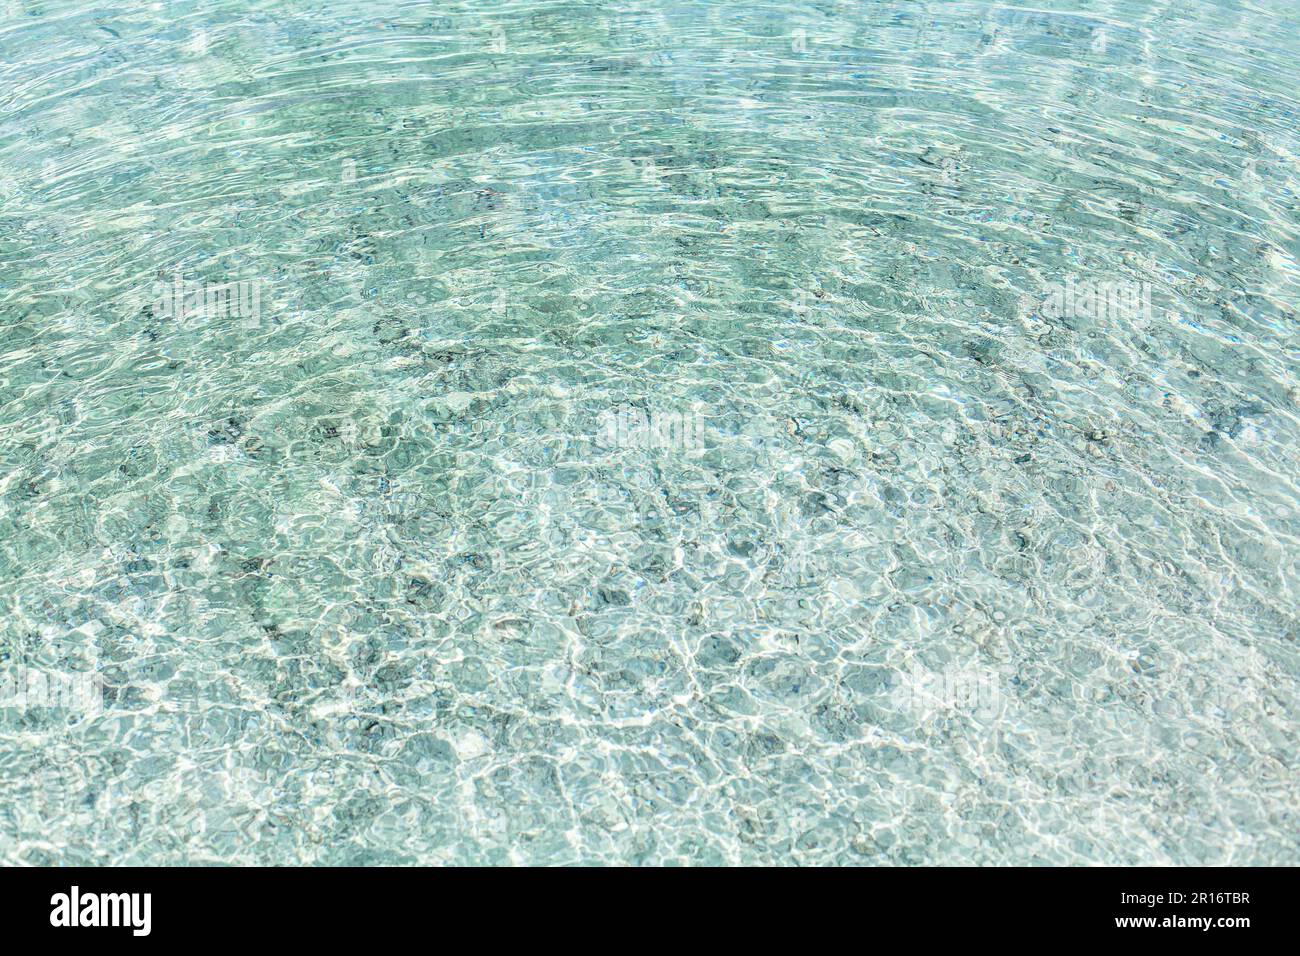 Sea water round waves texture, ripples water surface, concentric rings  of falling drops, transparent light blue ocean water top view, clear aqua back Stock Photo